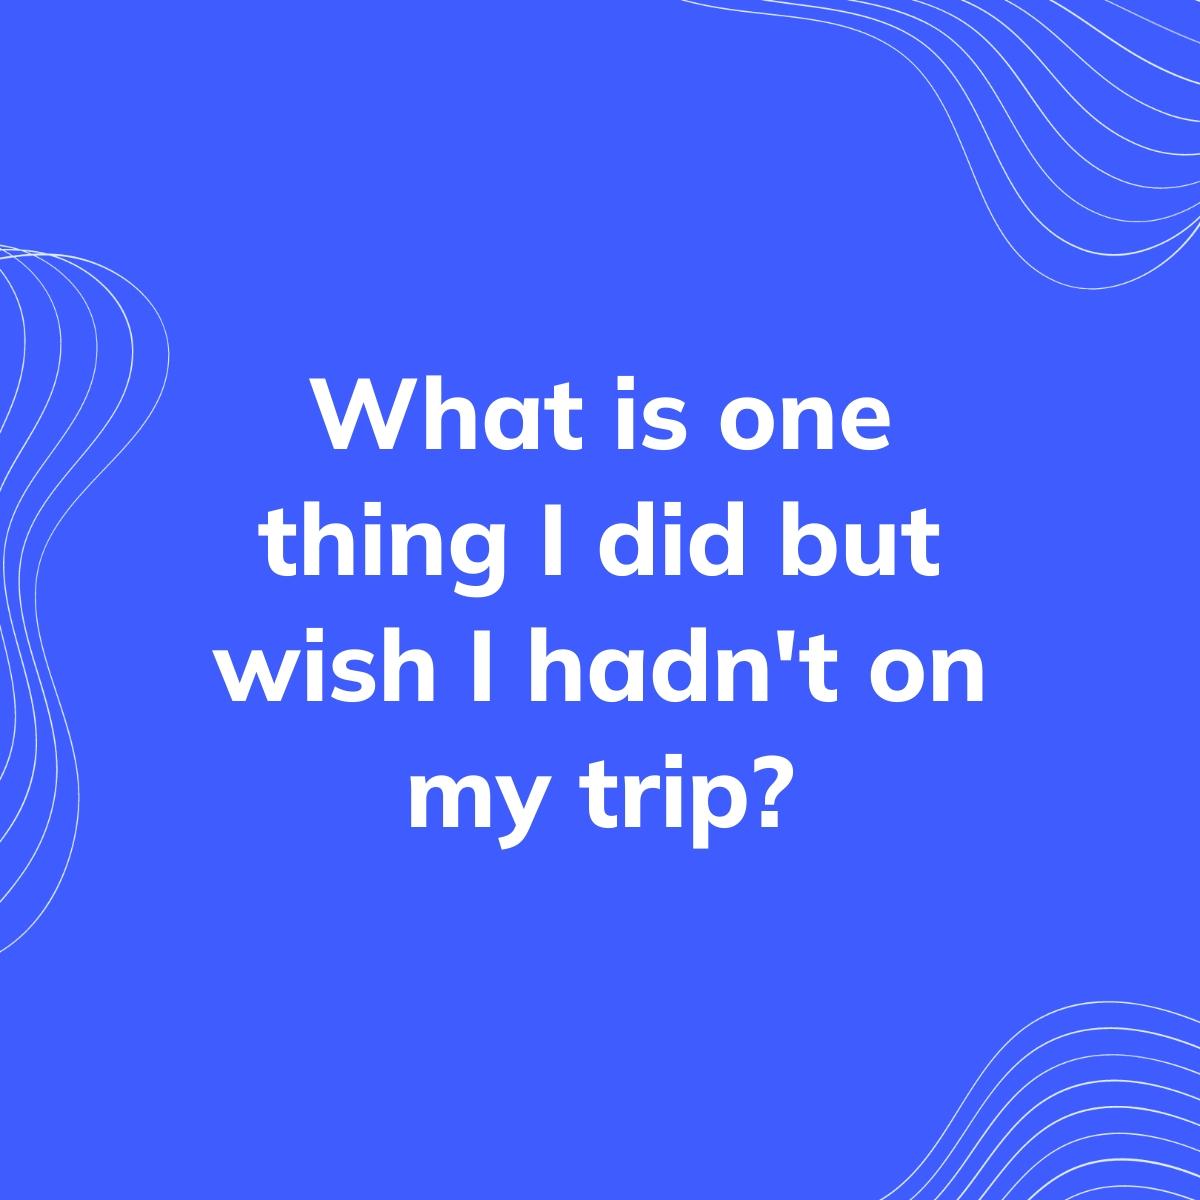 Journal Prompt: What is one thing I did but wish I hadn't on my trip?